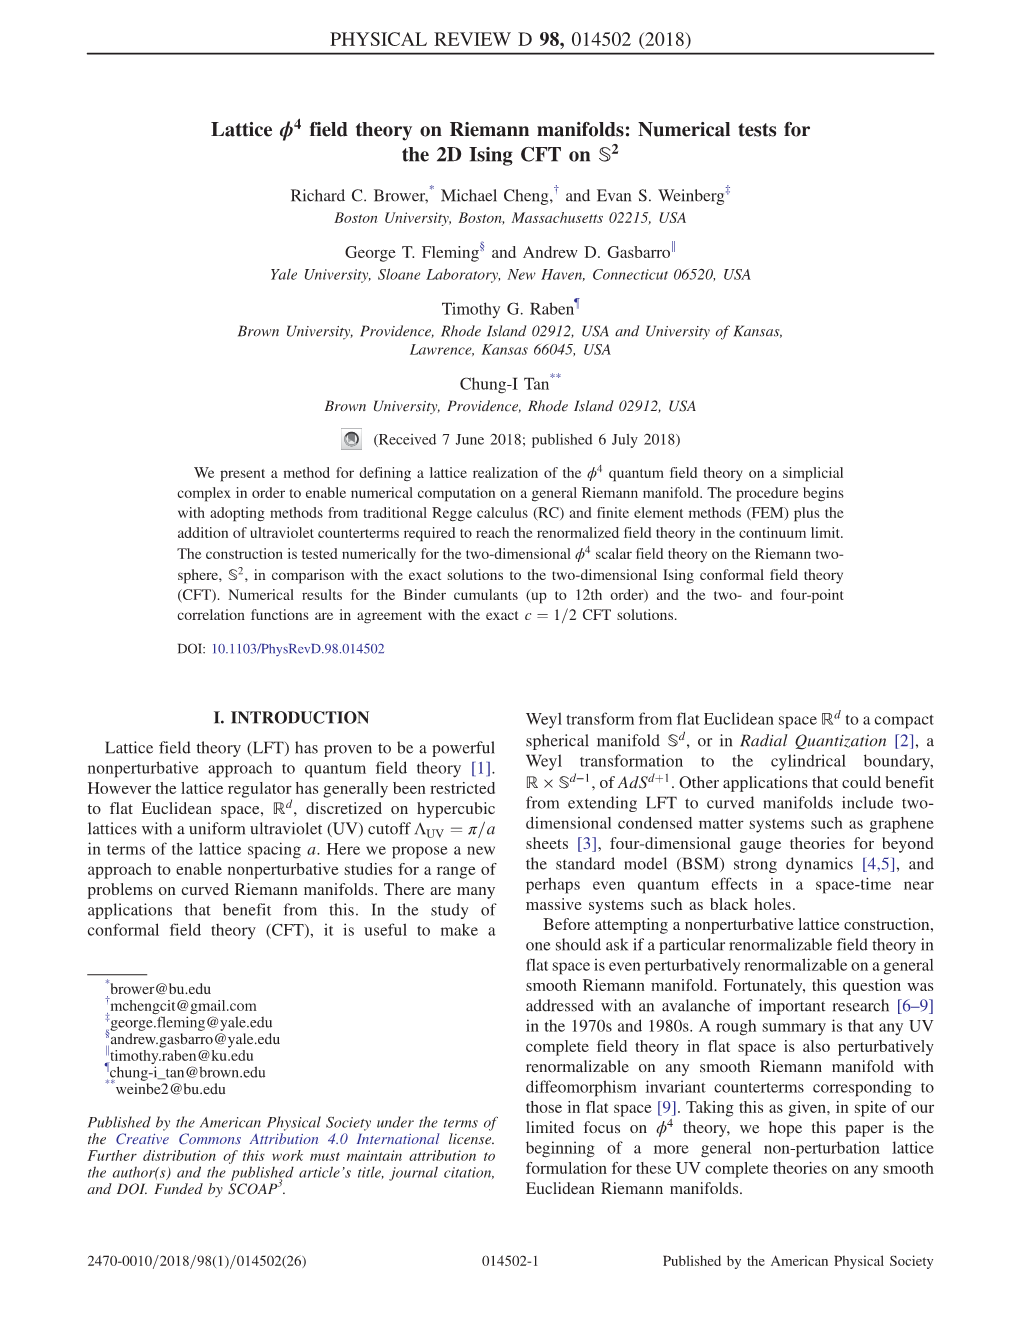 Lattice Φ4 Field Theory on Riemann Manifolds: Numerical Tests for the 2D Ising CFT on S2